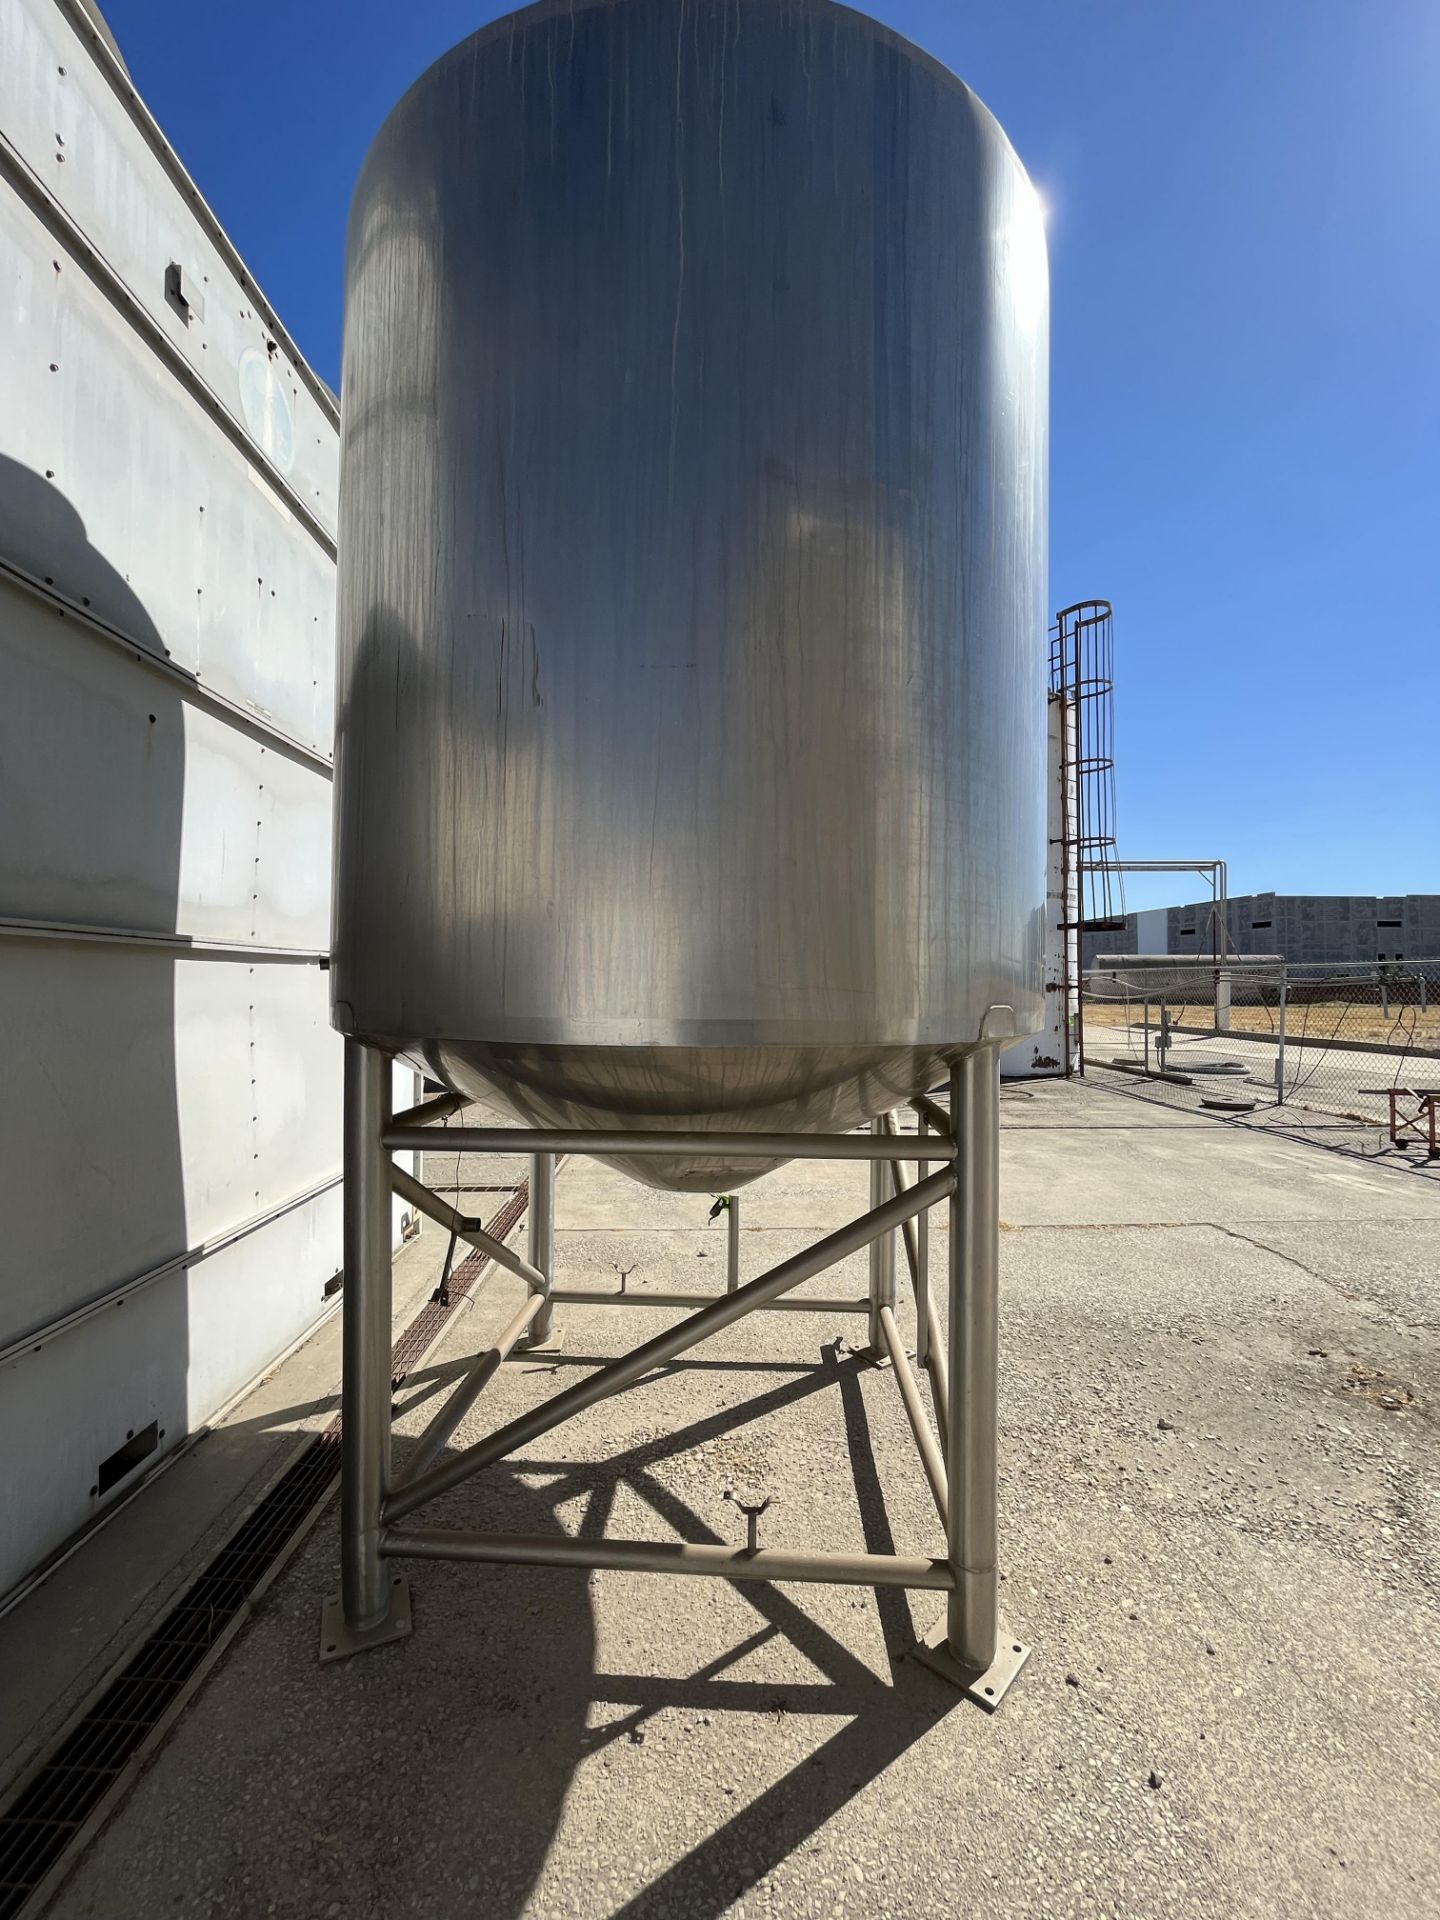 Sani-Fab Jacketed S/S Tank, Tank Dims.: Aprox. 7 ft. Tall x 80” Dia., Cone Bottom, Mounted on S/S